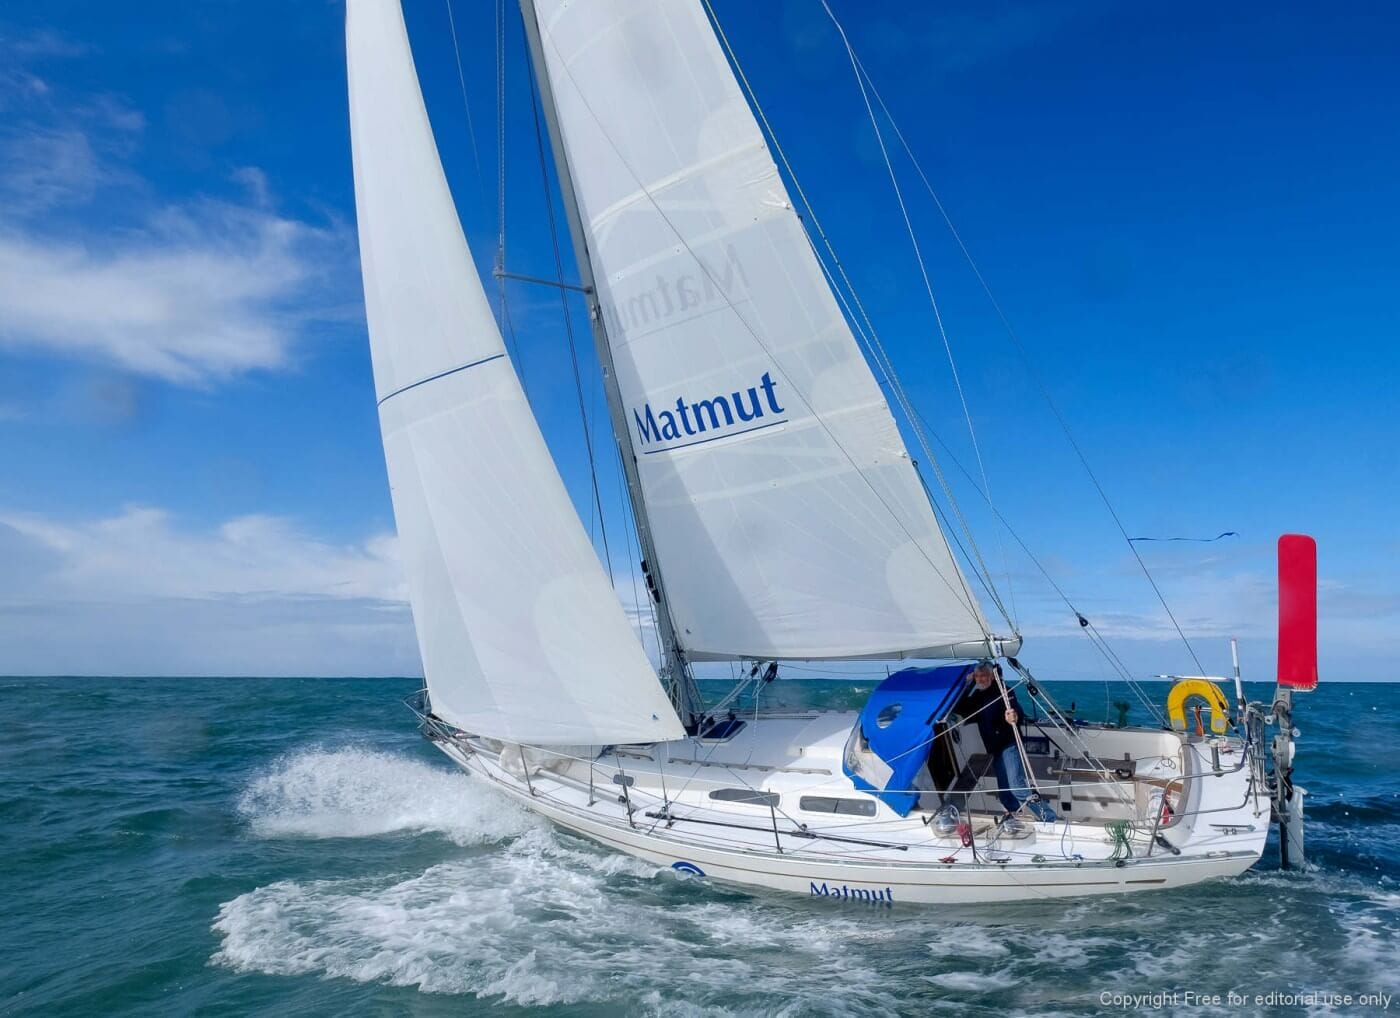 The Golden Globe Race—The Boats and the Refits Attainable Adventure